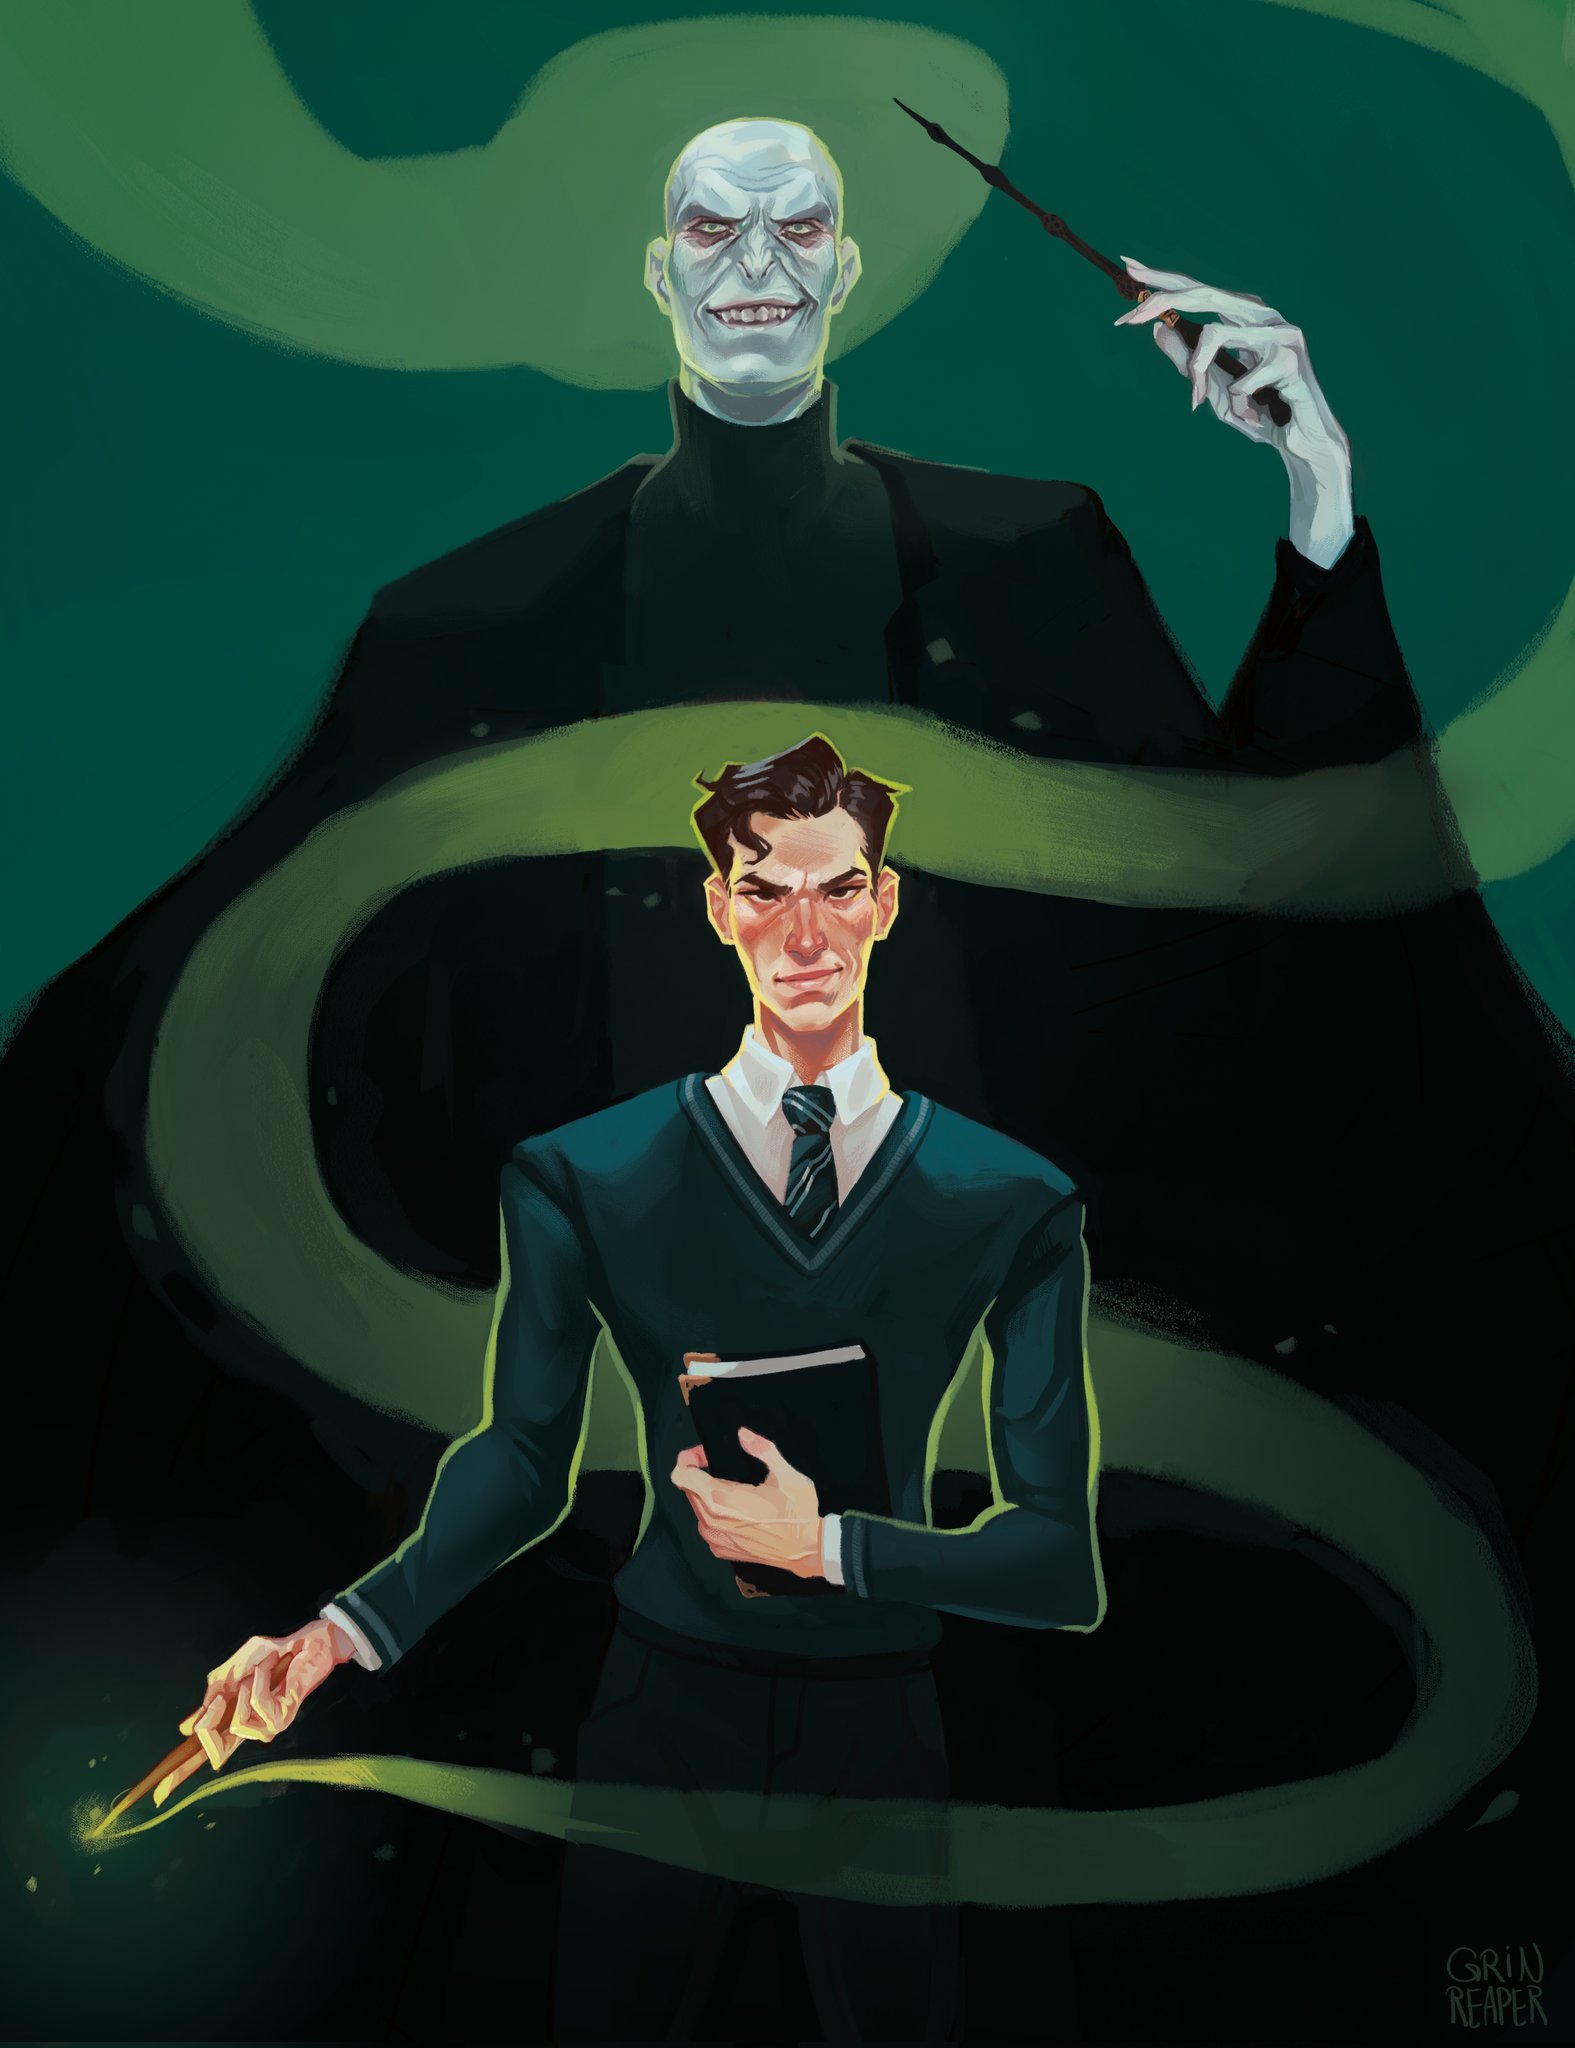 Grin on Twitter: "The past and the future. #voldemort #tomriddle https://t.co/TRevejLNNV" / Twitter